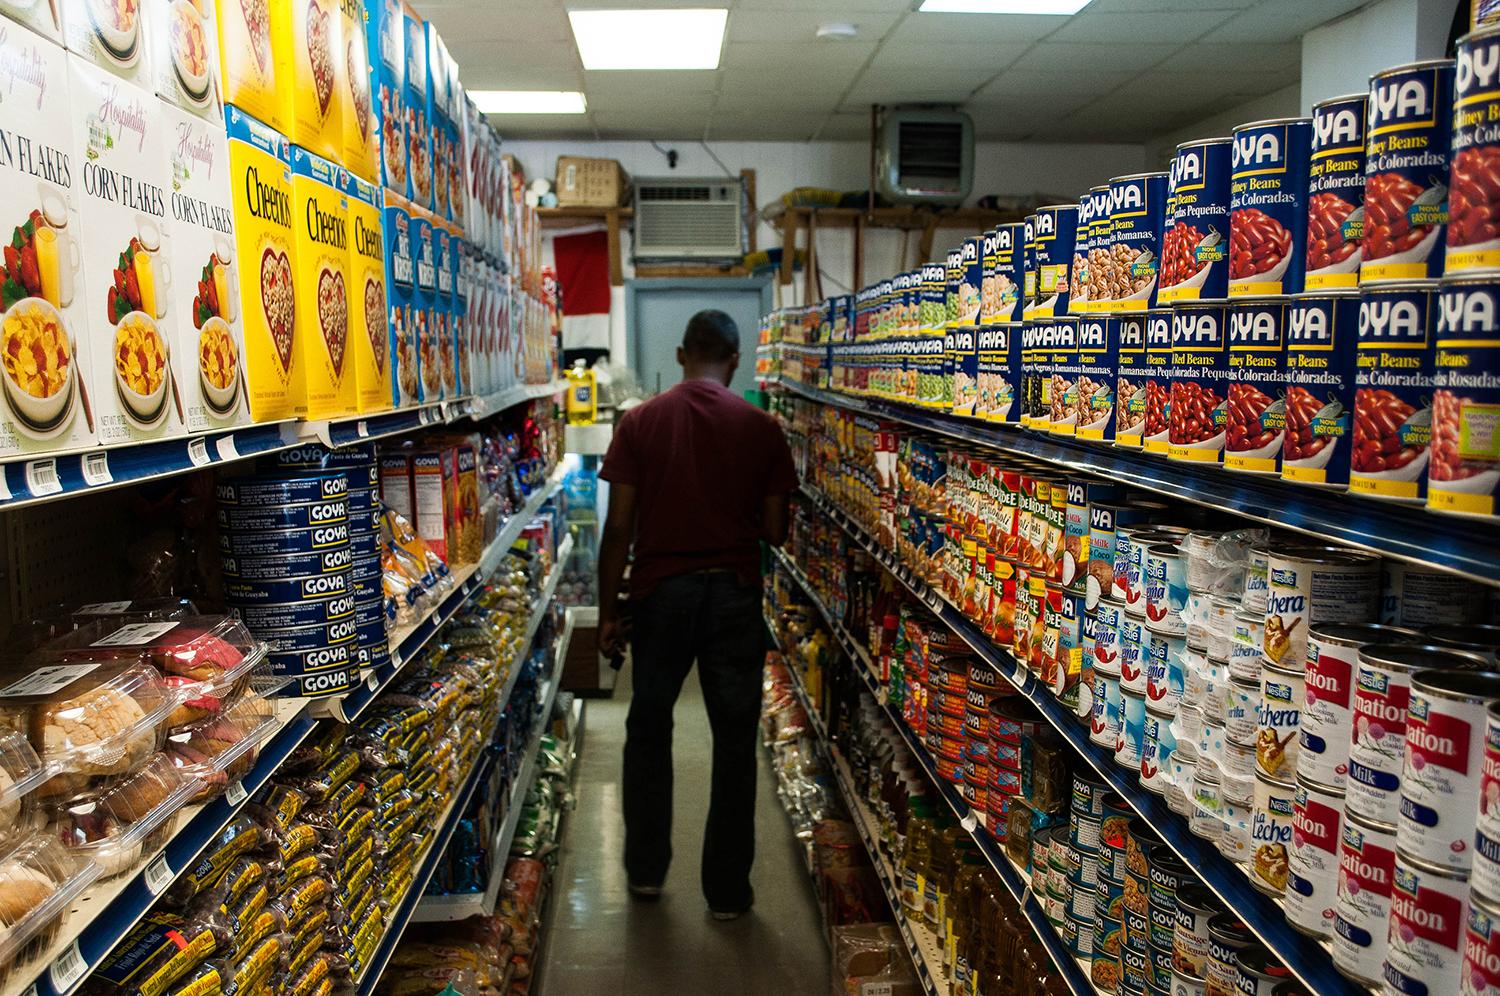 Much of the food available at urban corner shops are dried, processed and packaged products, which often have low vitamin and nutritional content compared to fresher produce. (Evlis Batiz / Flickr)